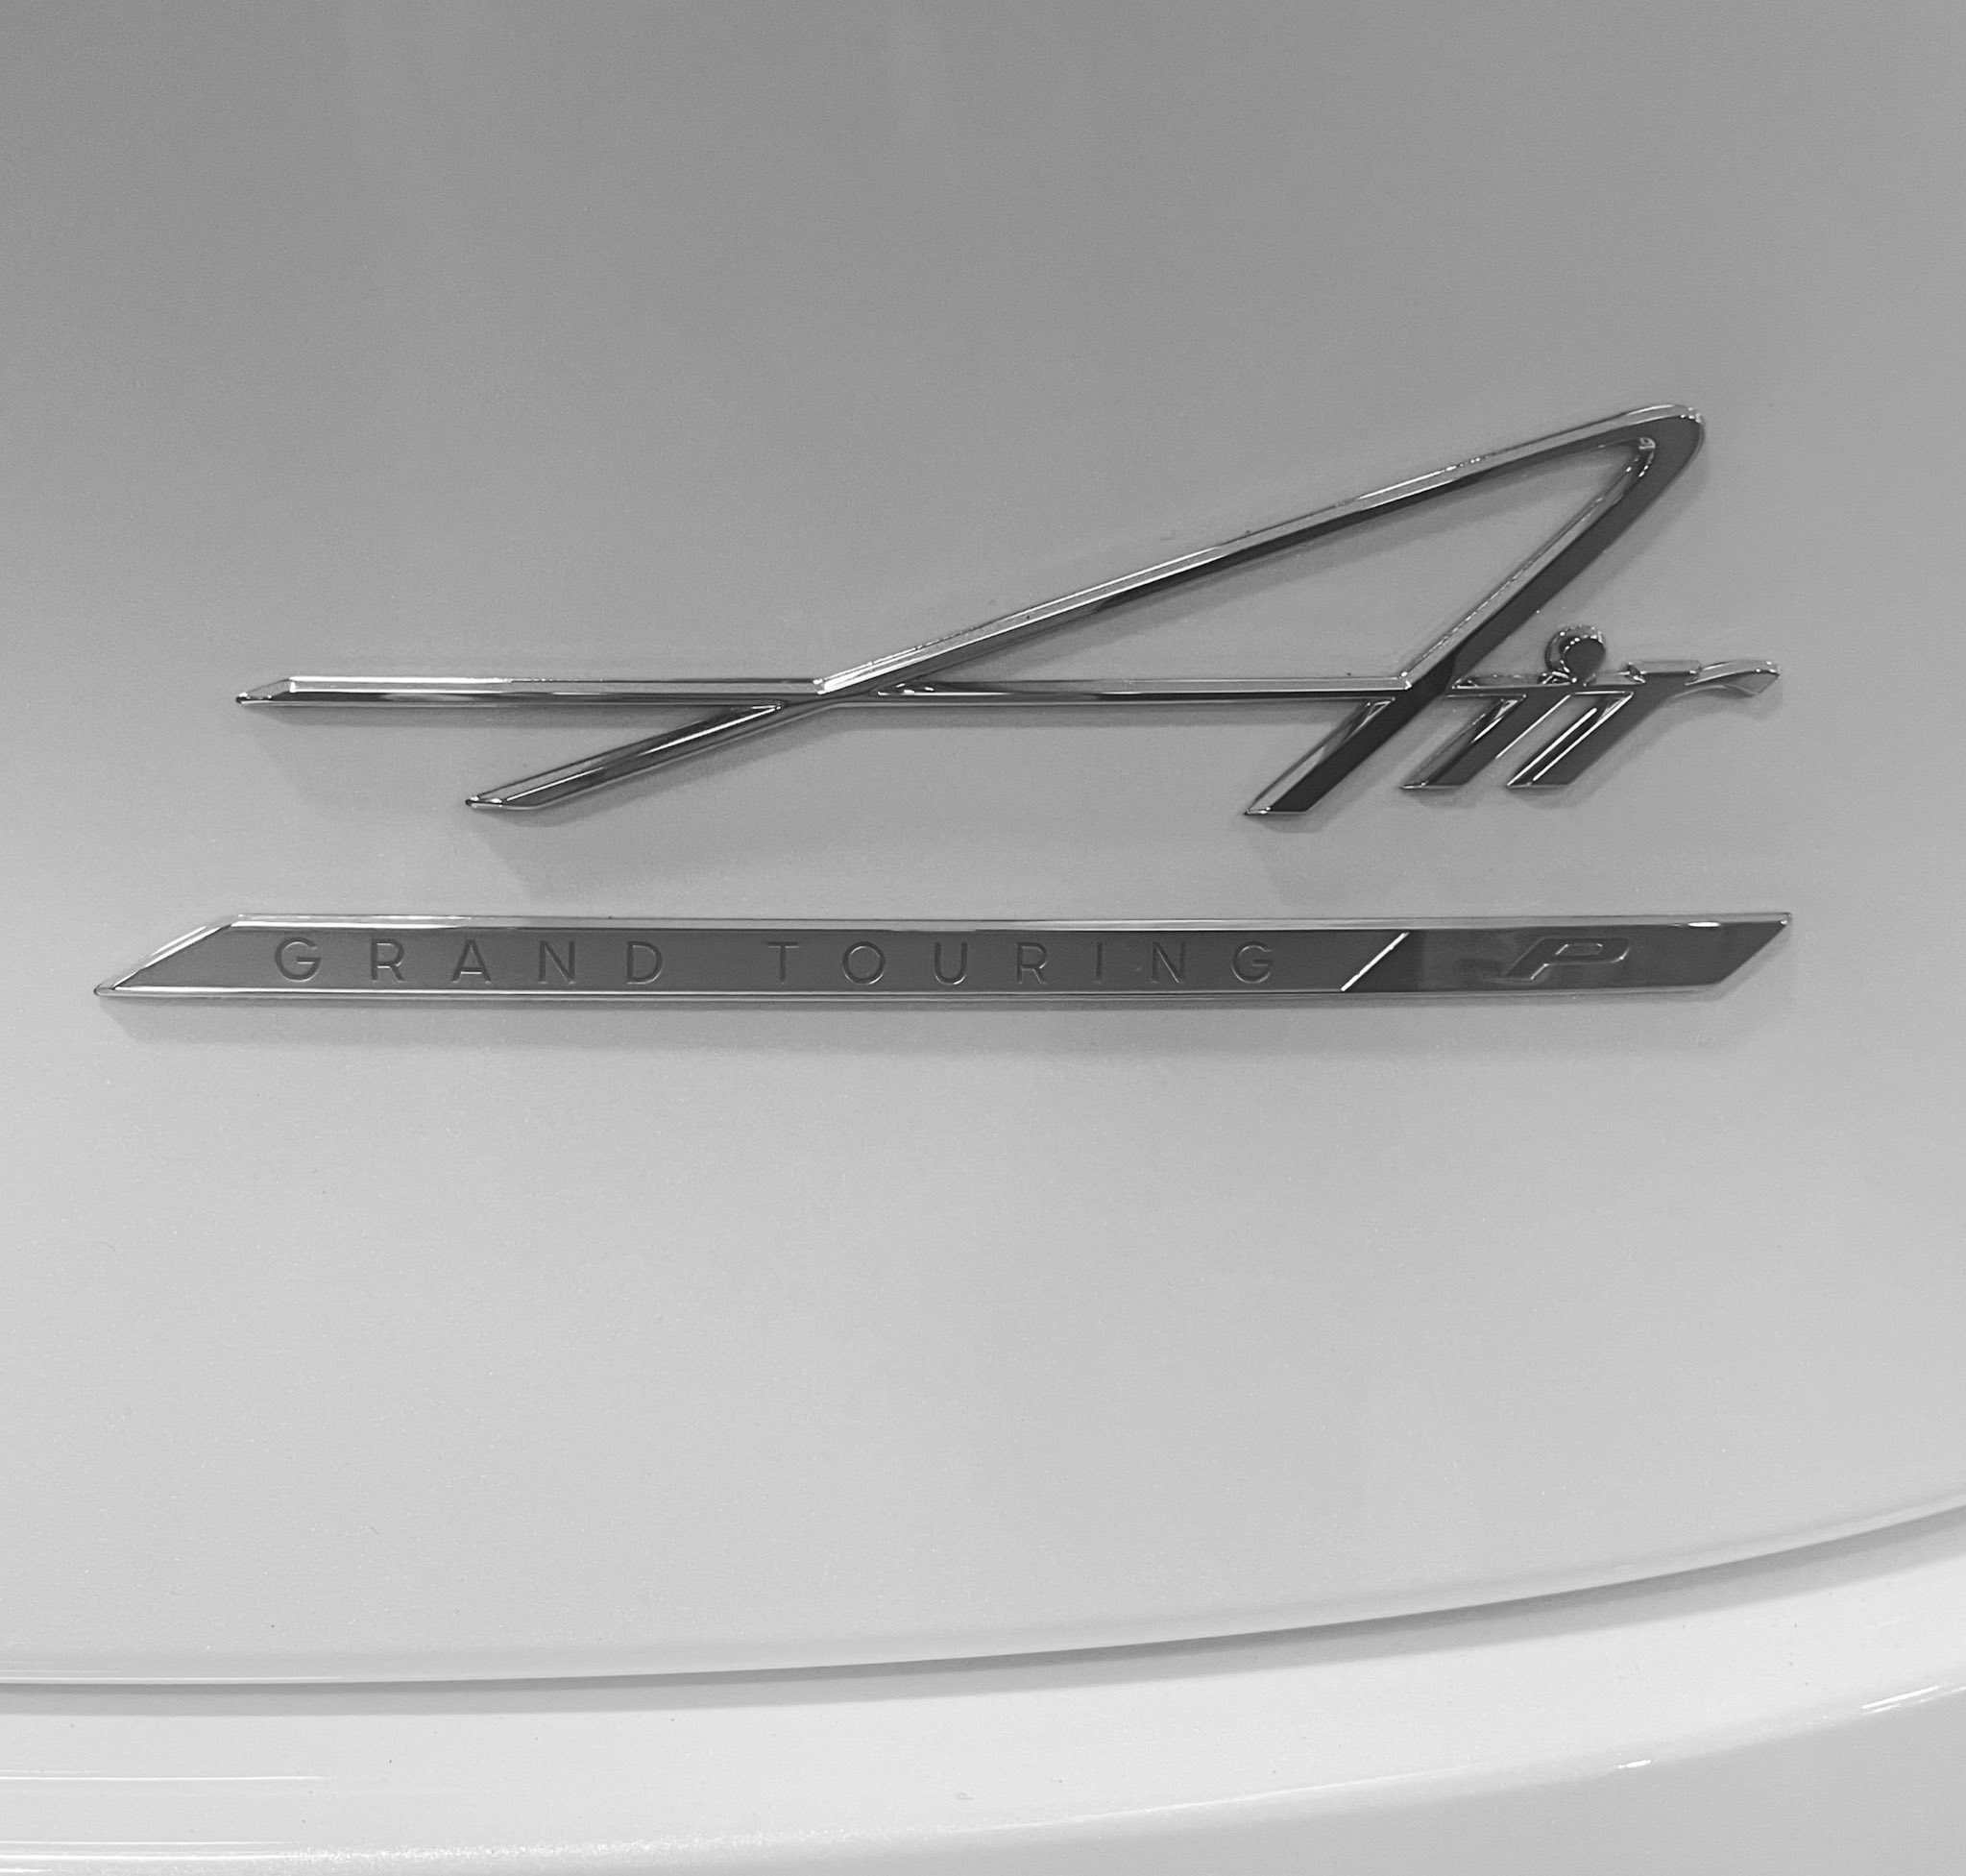 Lucid Air Performance Badge On Grand Touring